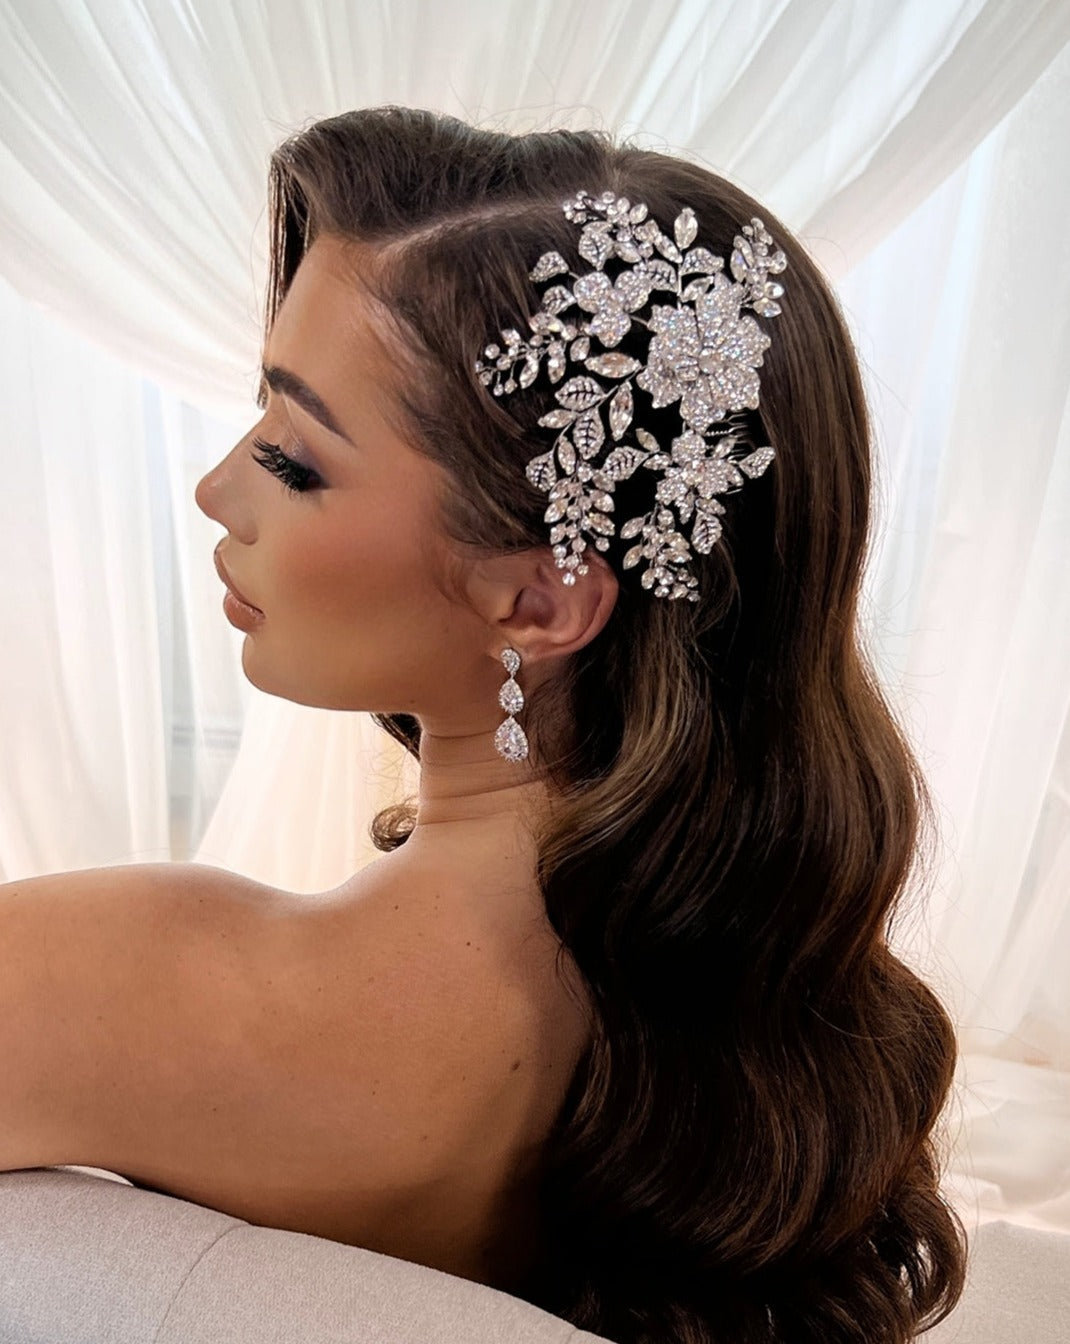 female model wearing bridal hair comb with floral and leafy crystal details